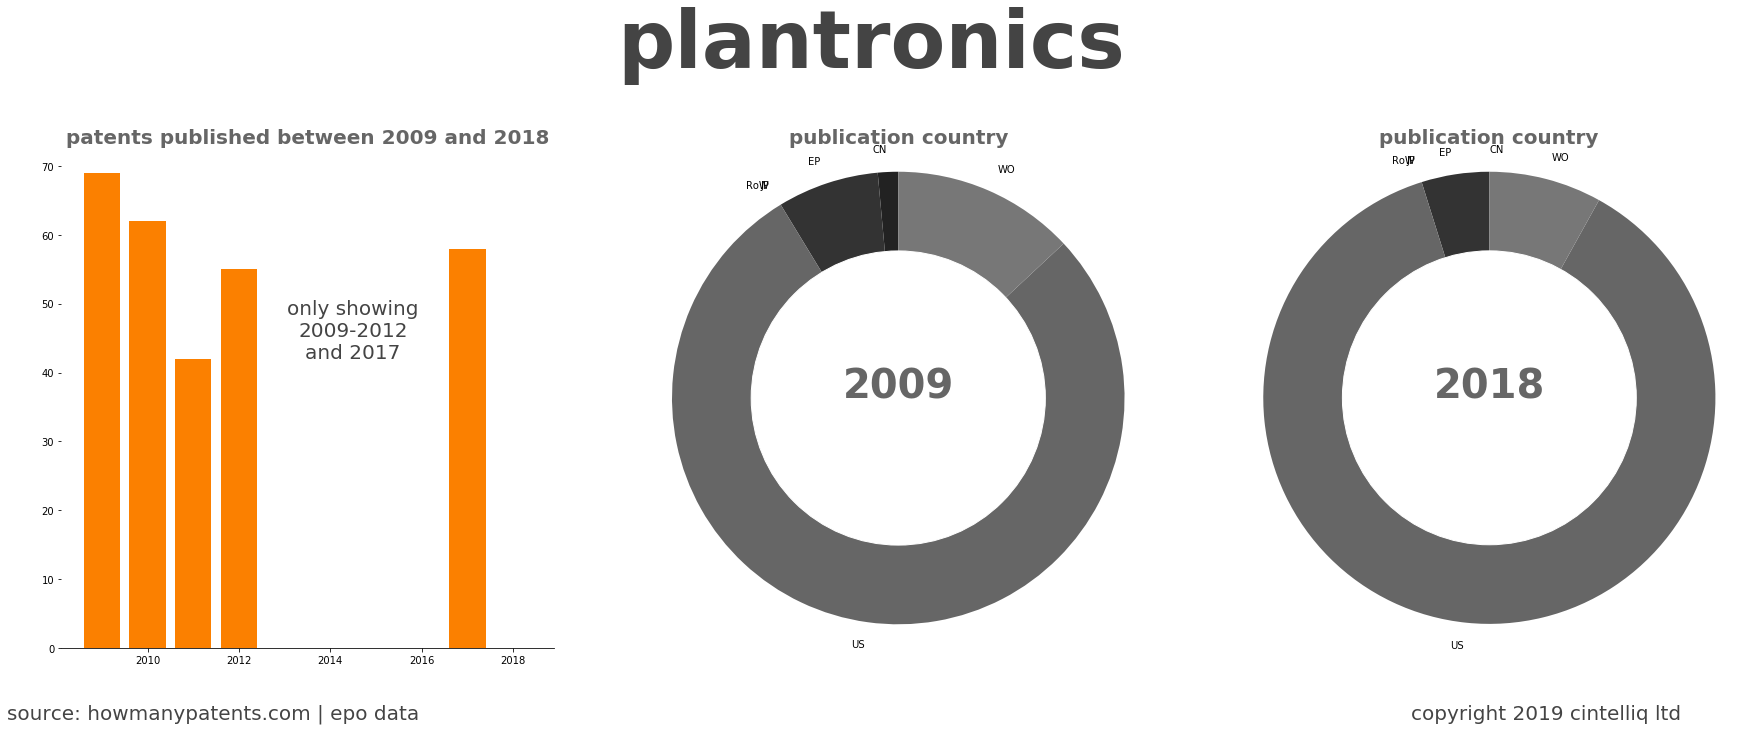 summary of patents for Plantronics